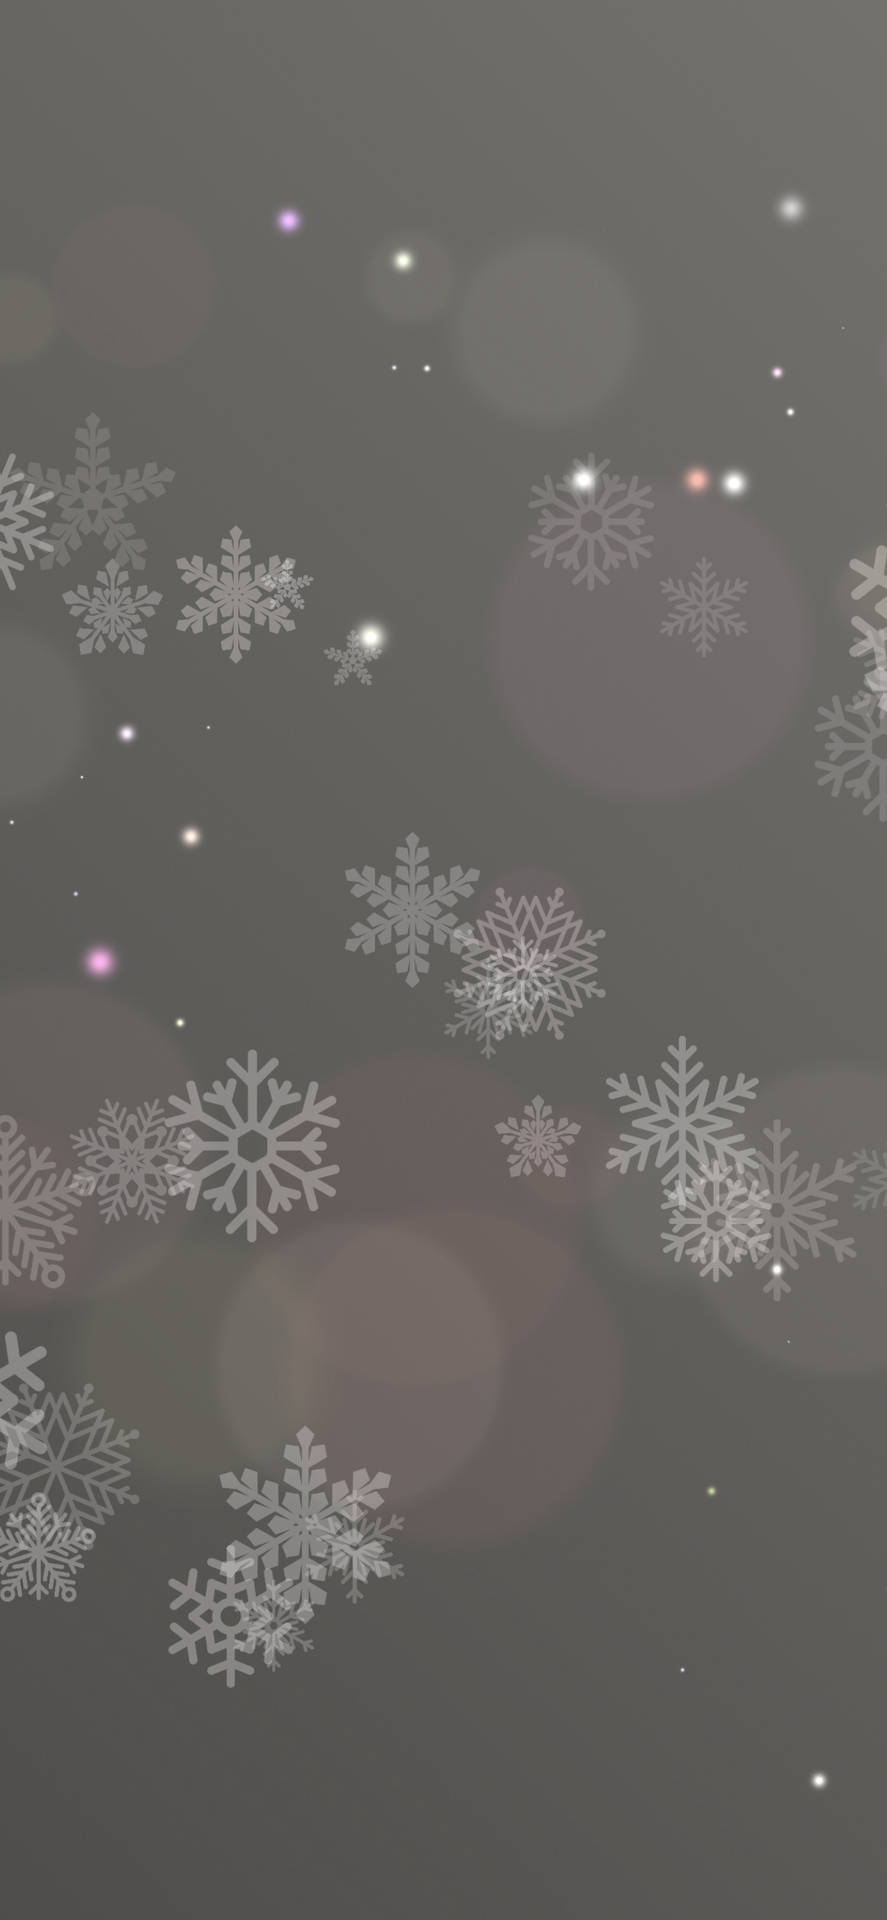 Snowflakes On A Gray Background Wallpaper